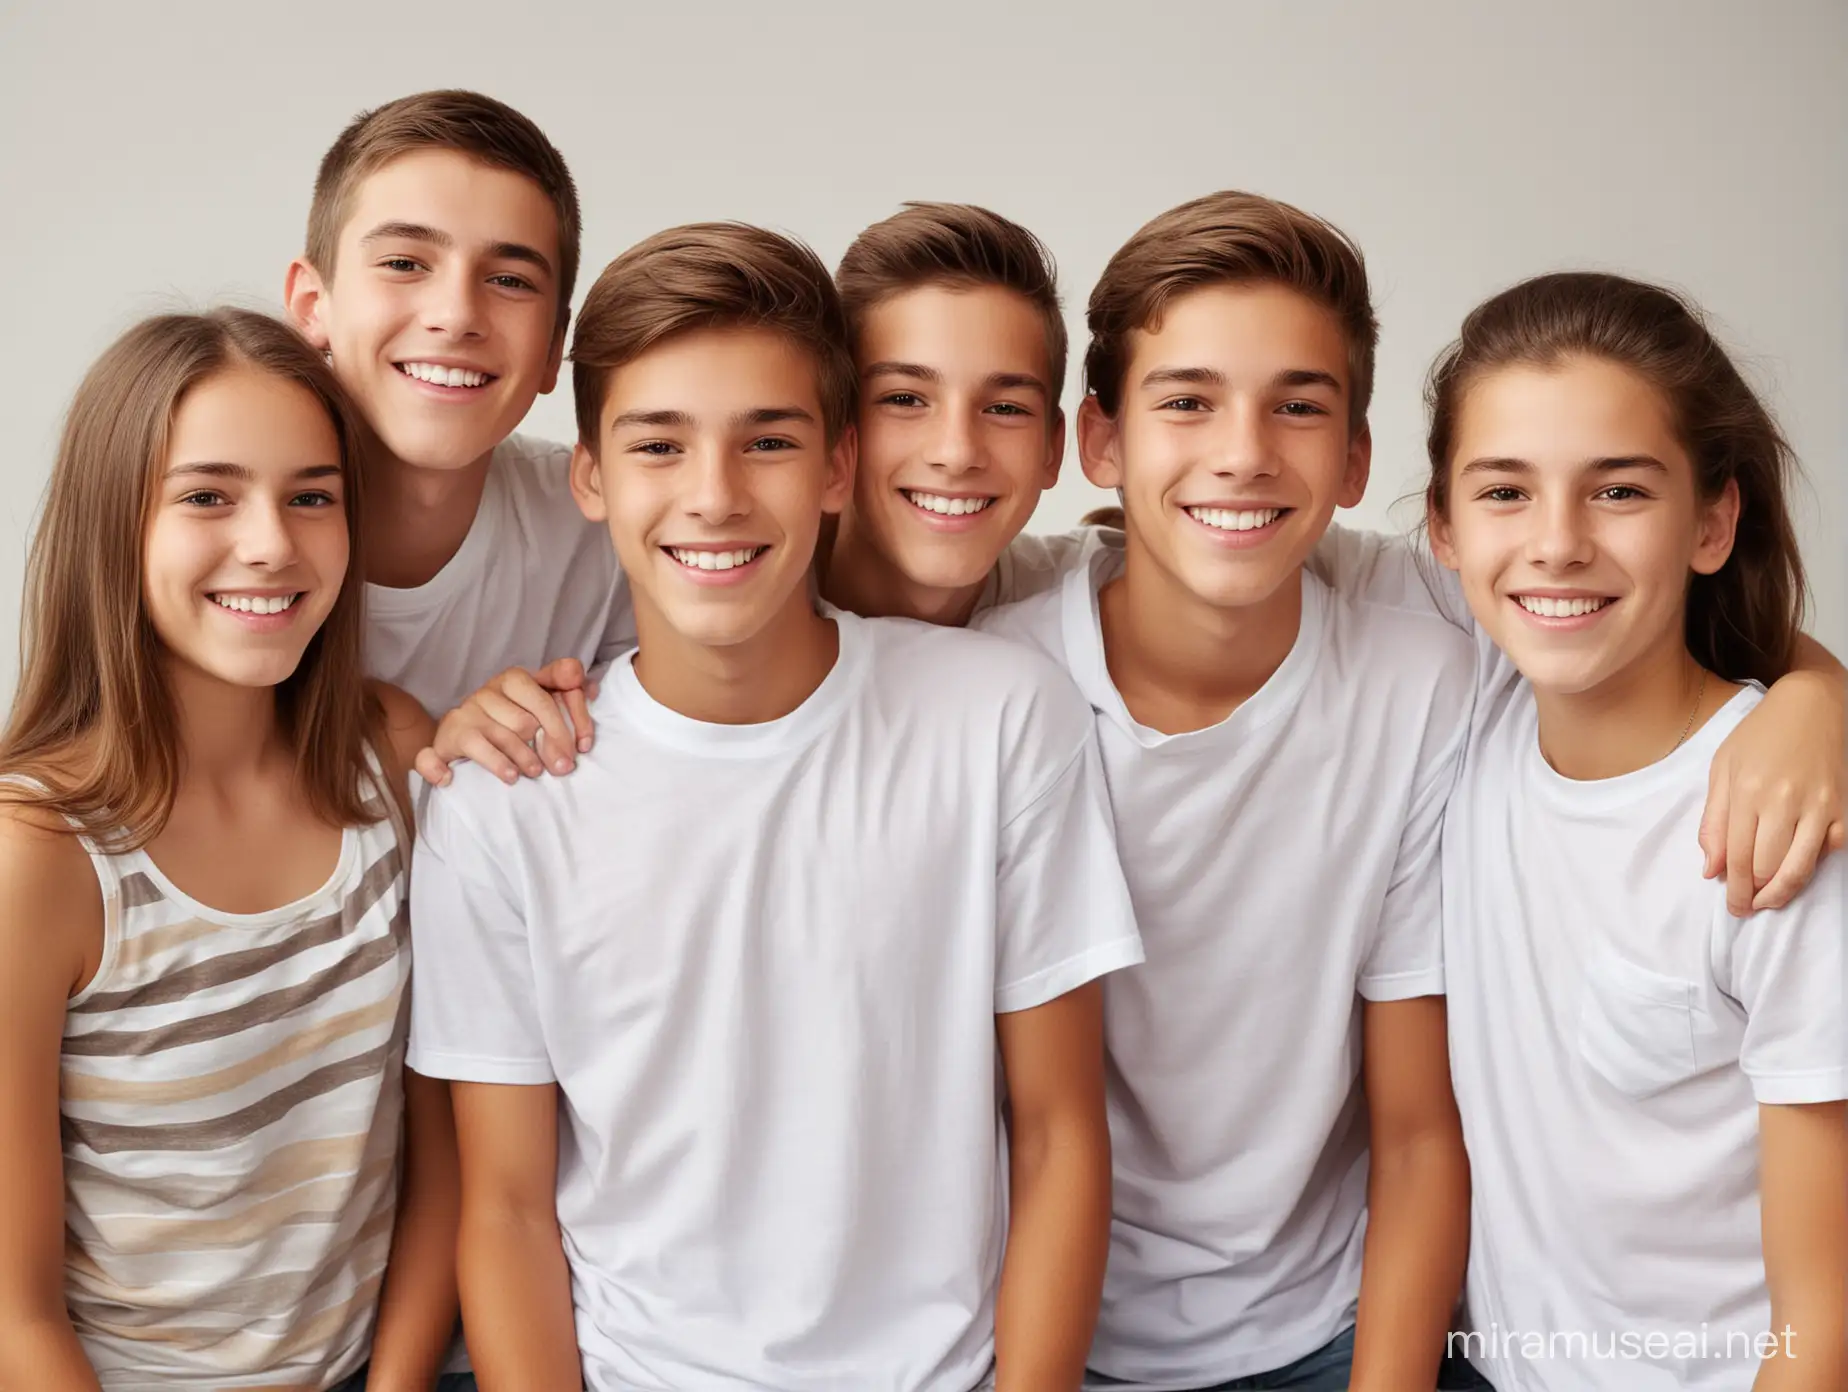 smiling teens boys and girls. brown and white teens